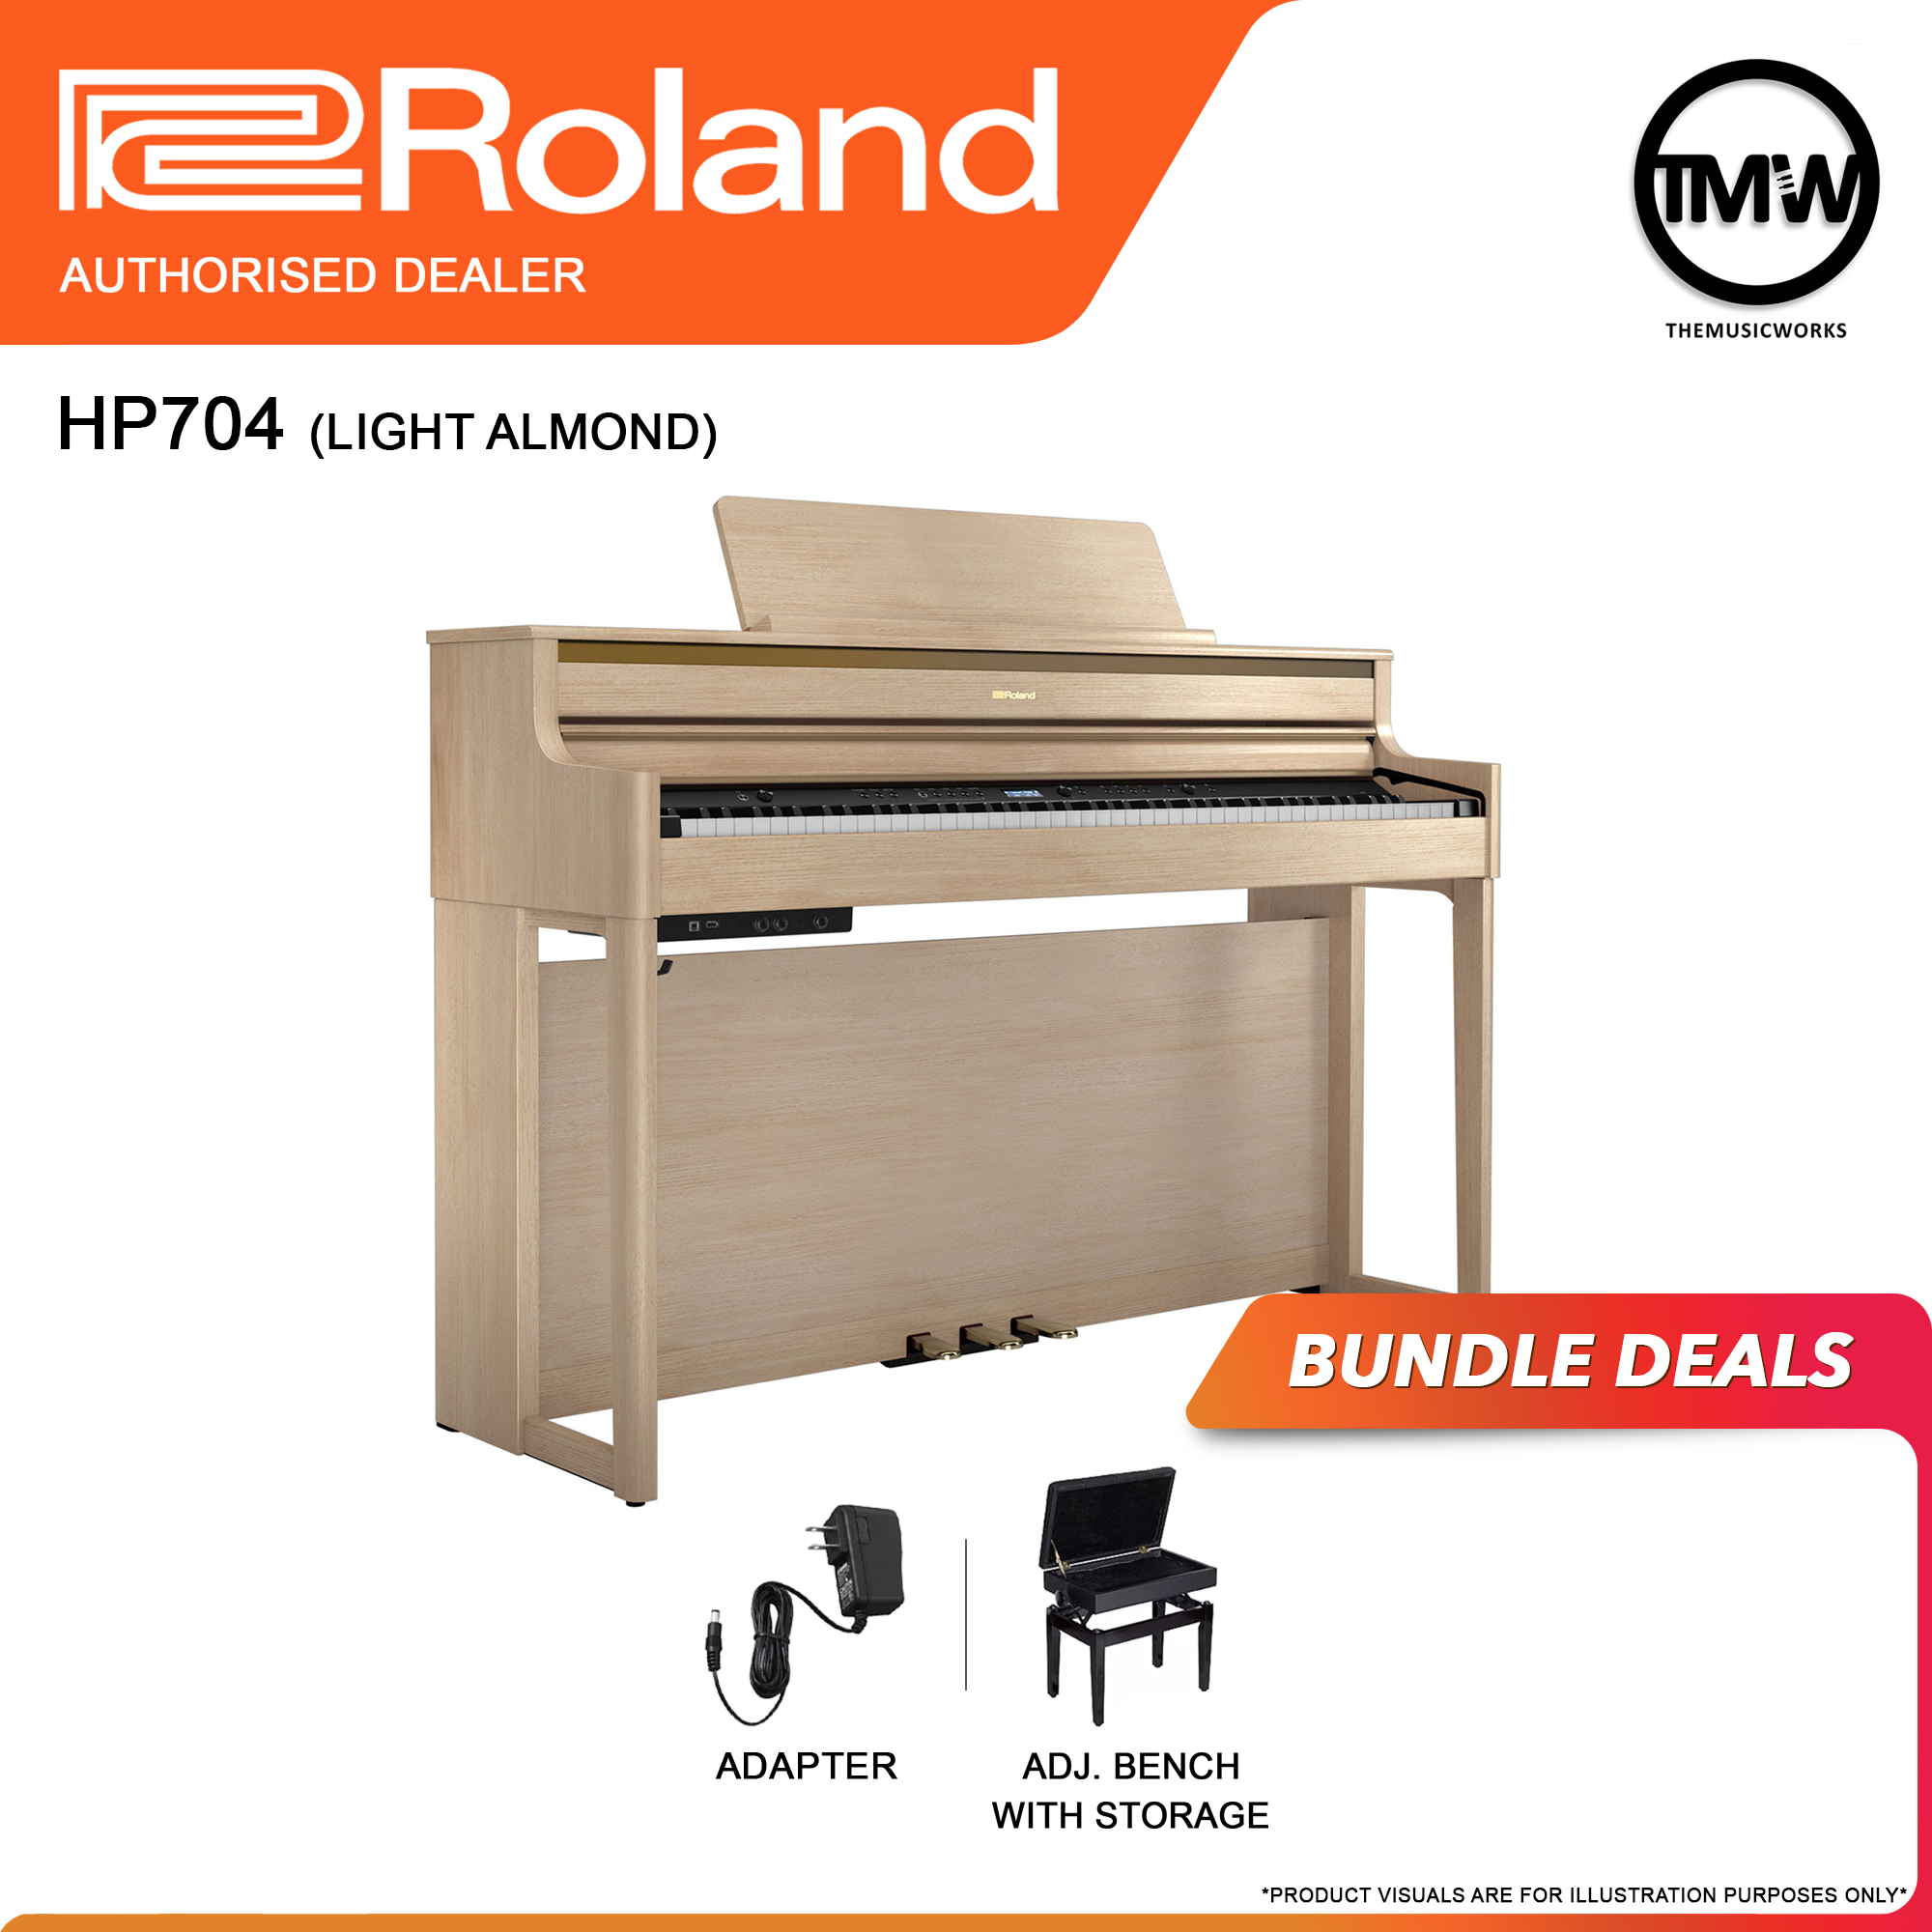 roland hp704 light almond with adapter, and adjustable bench with storage